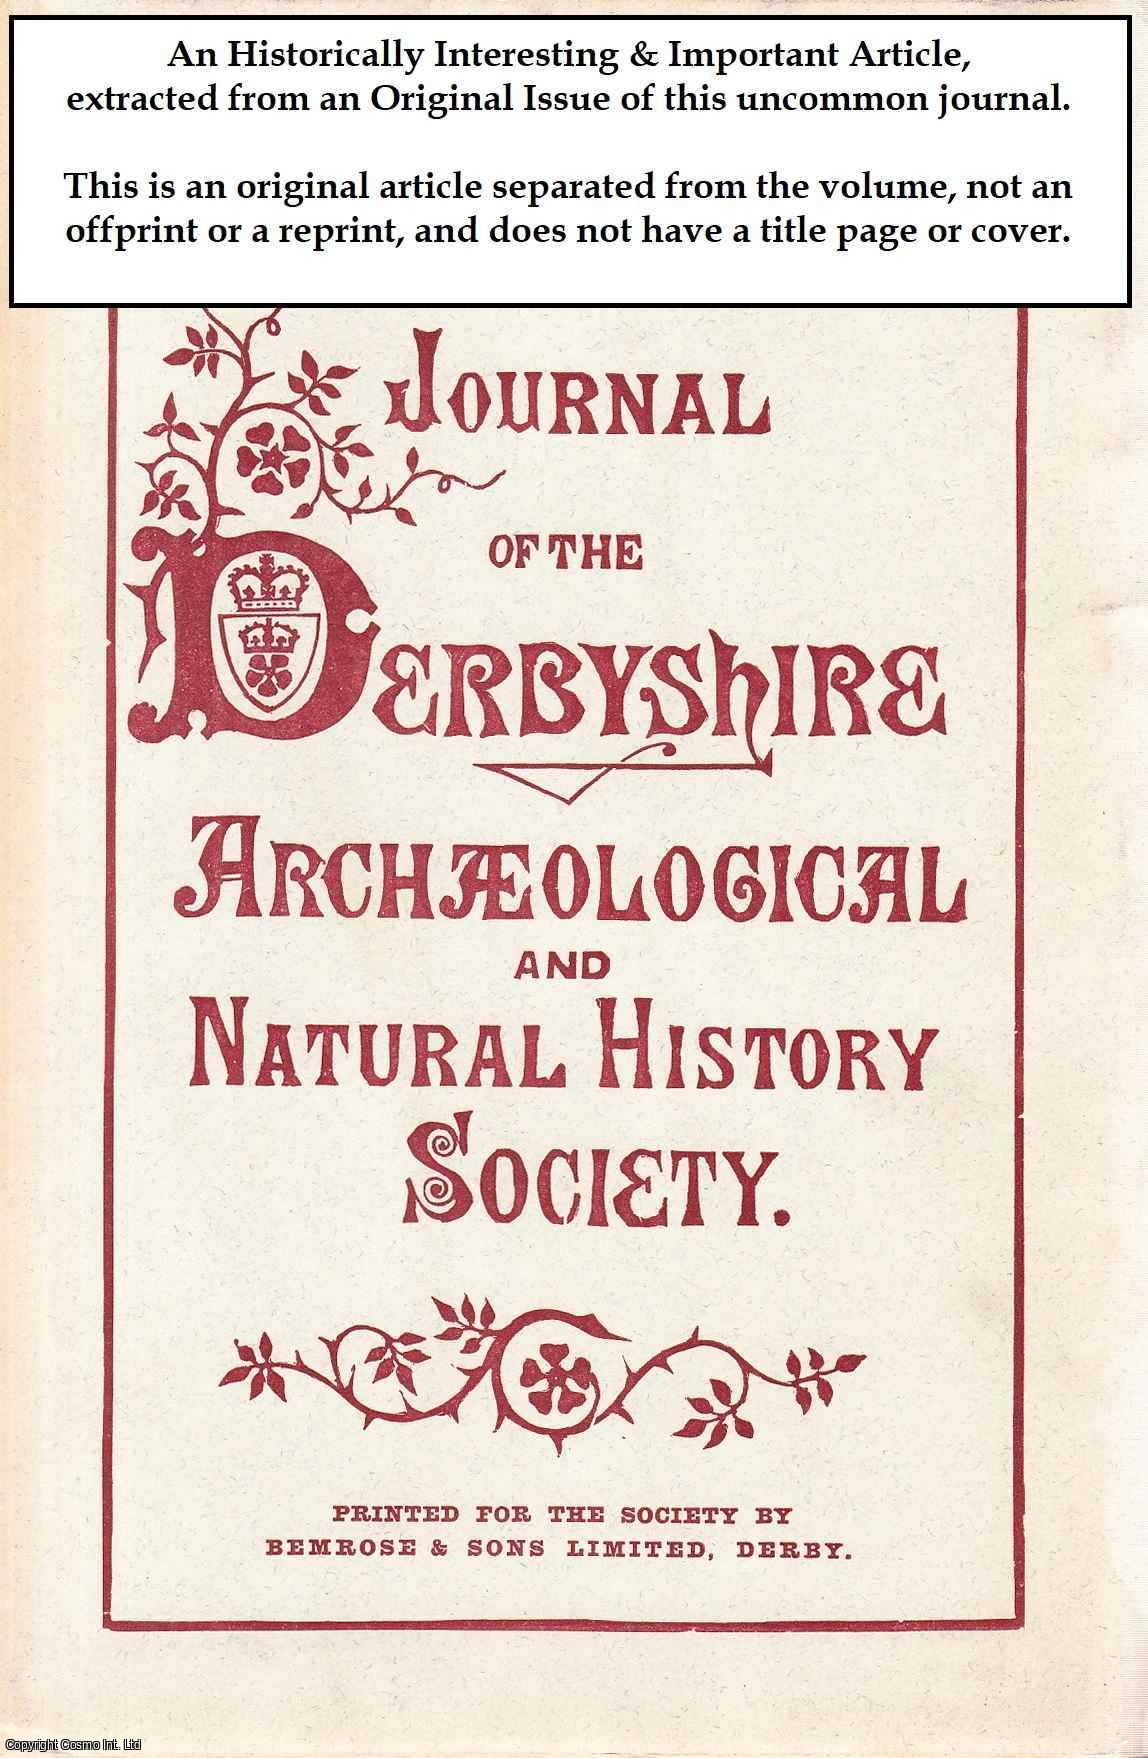 Francis C. R. Jourdain - The Heraldic Stained Glass in Ashburne Church, Derbyshire. An original article from the Journal of the Derbyshire Archaeological & Natural History Society, 1881.